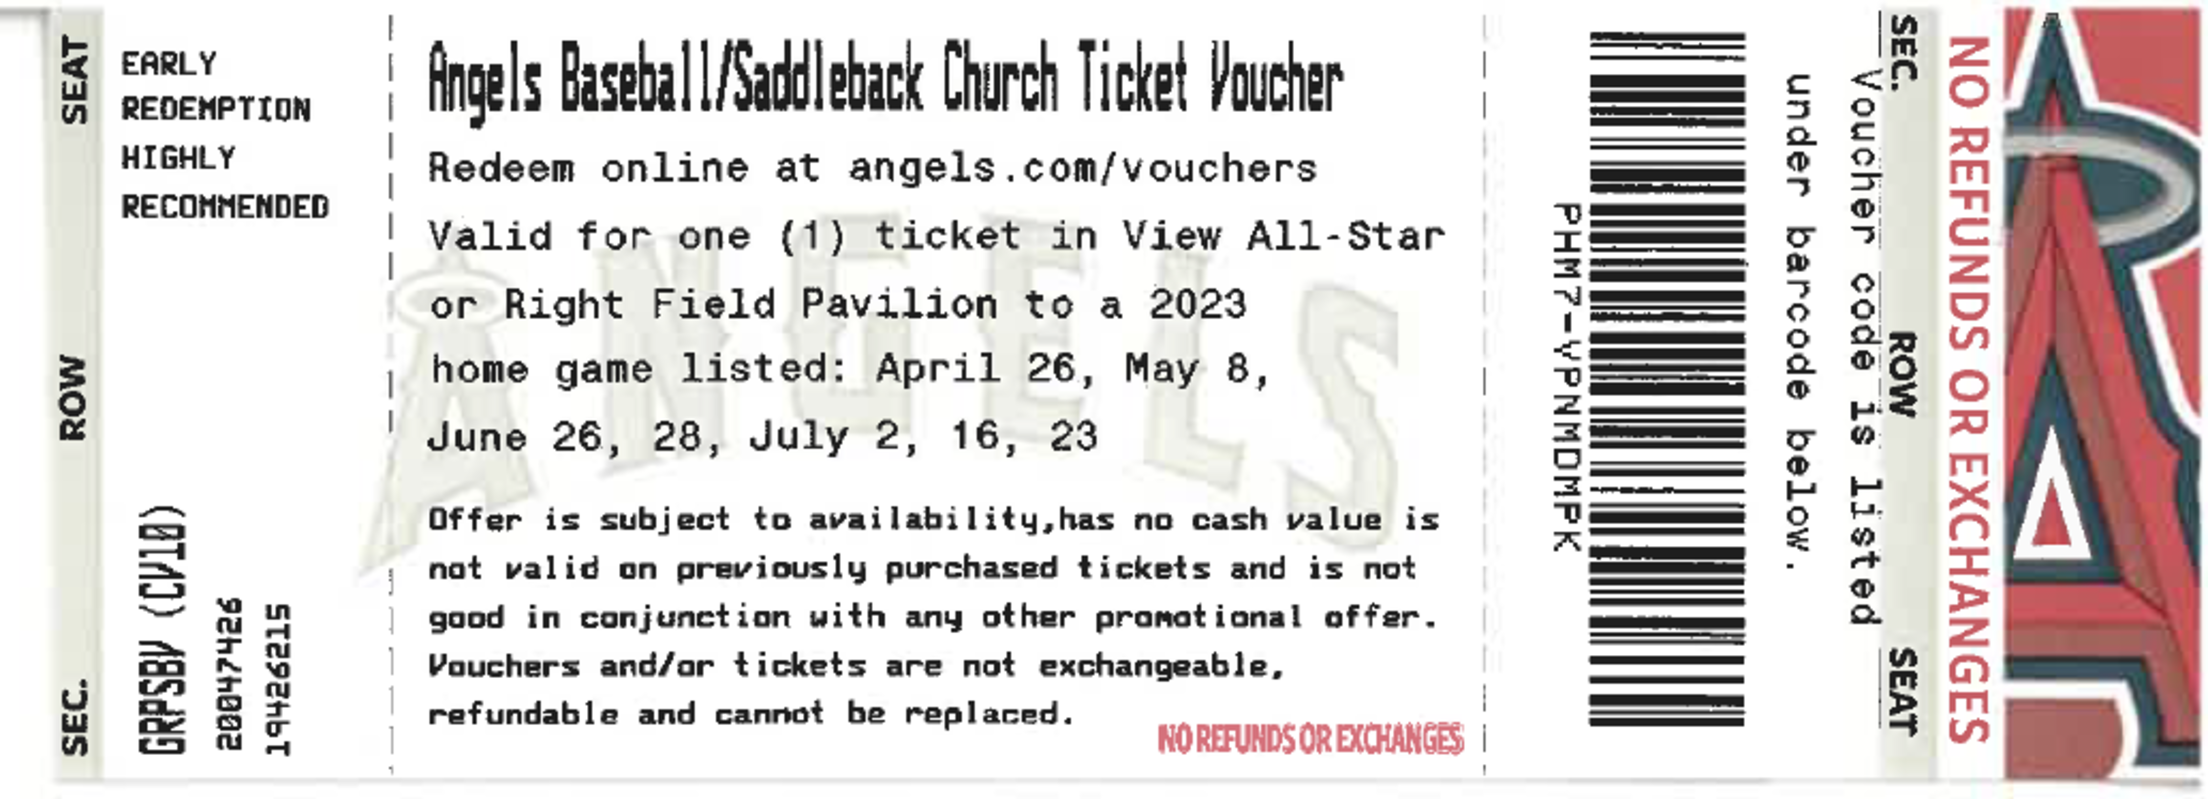 angels promotional schedule 2023